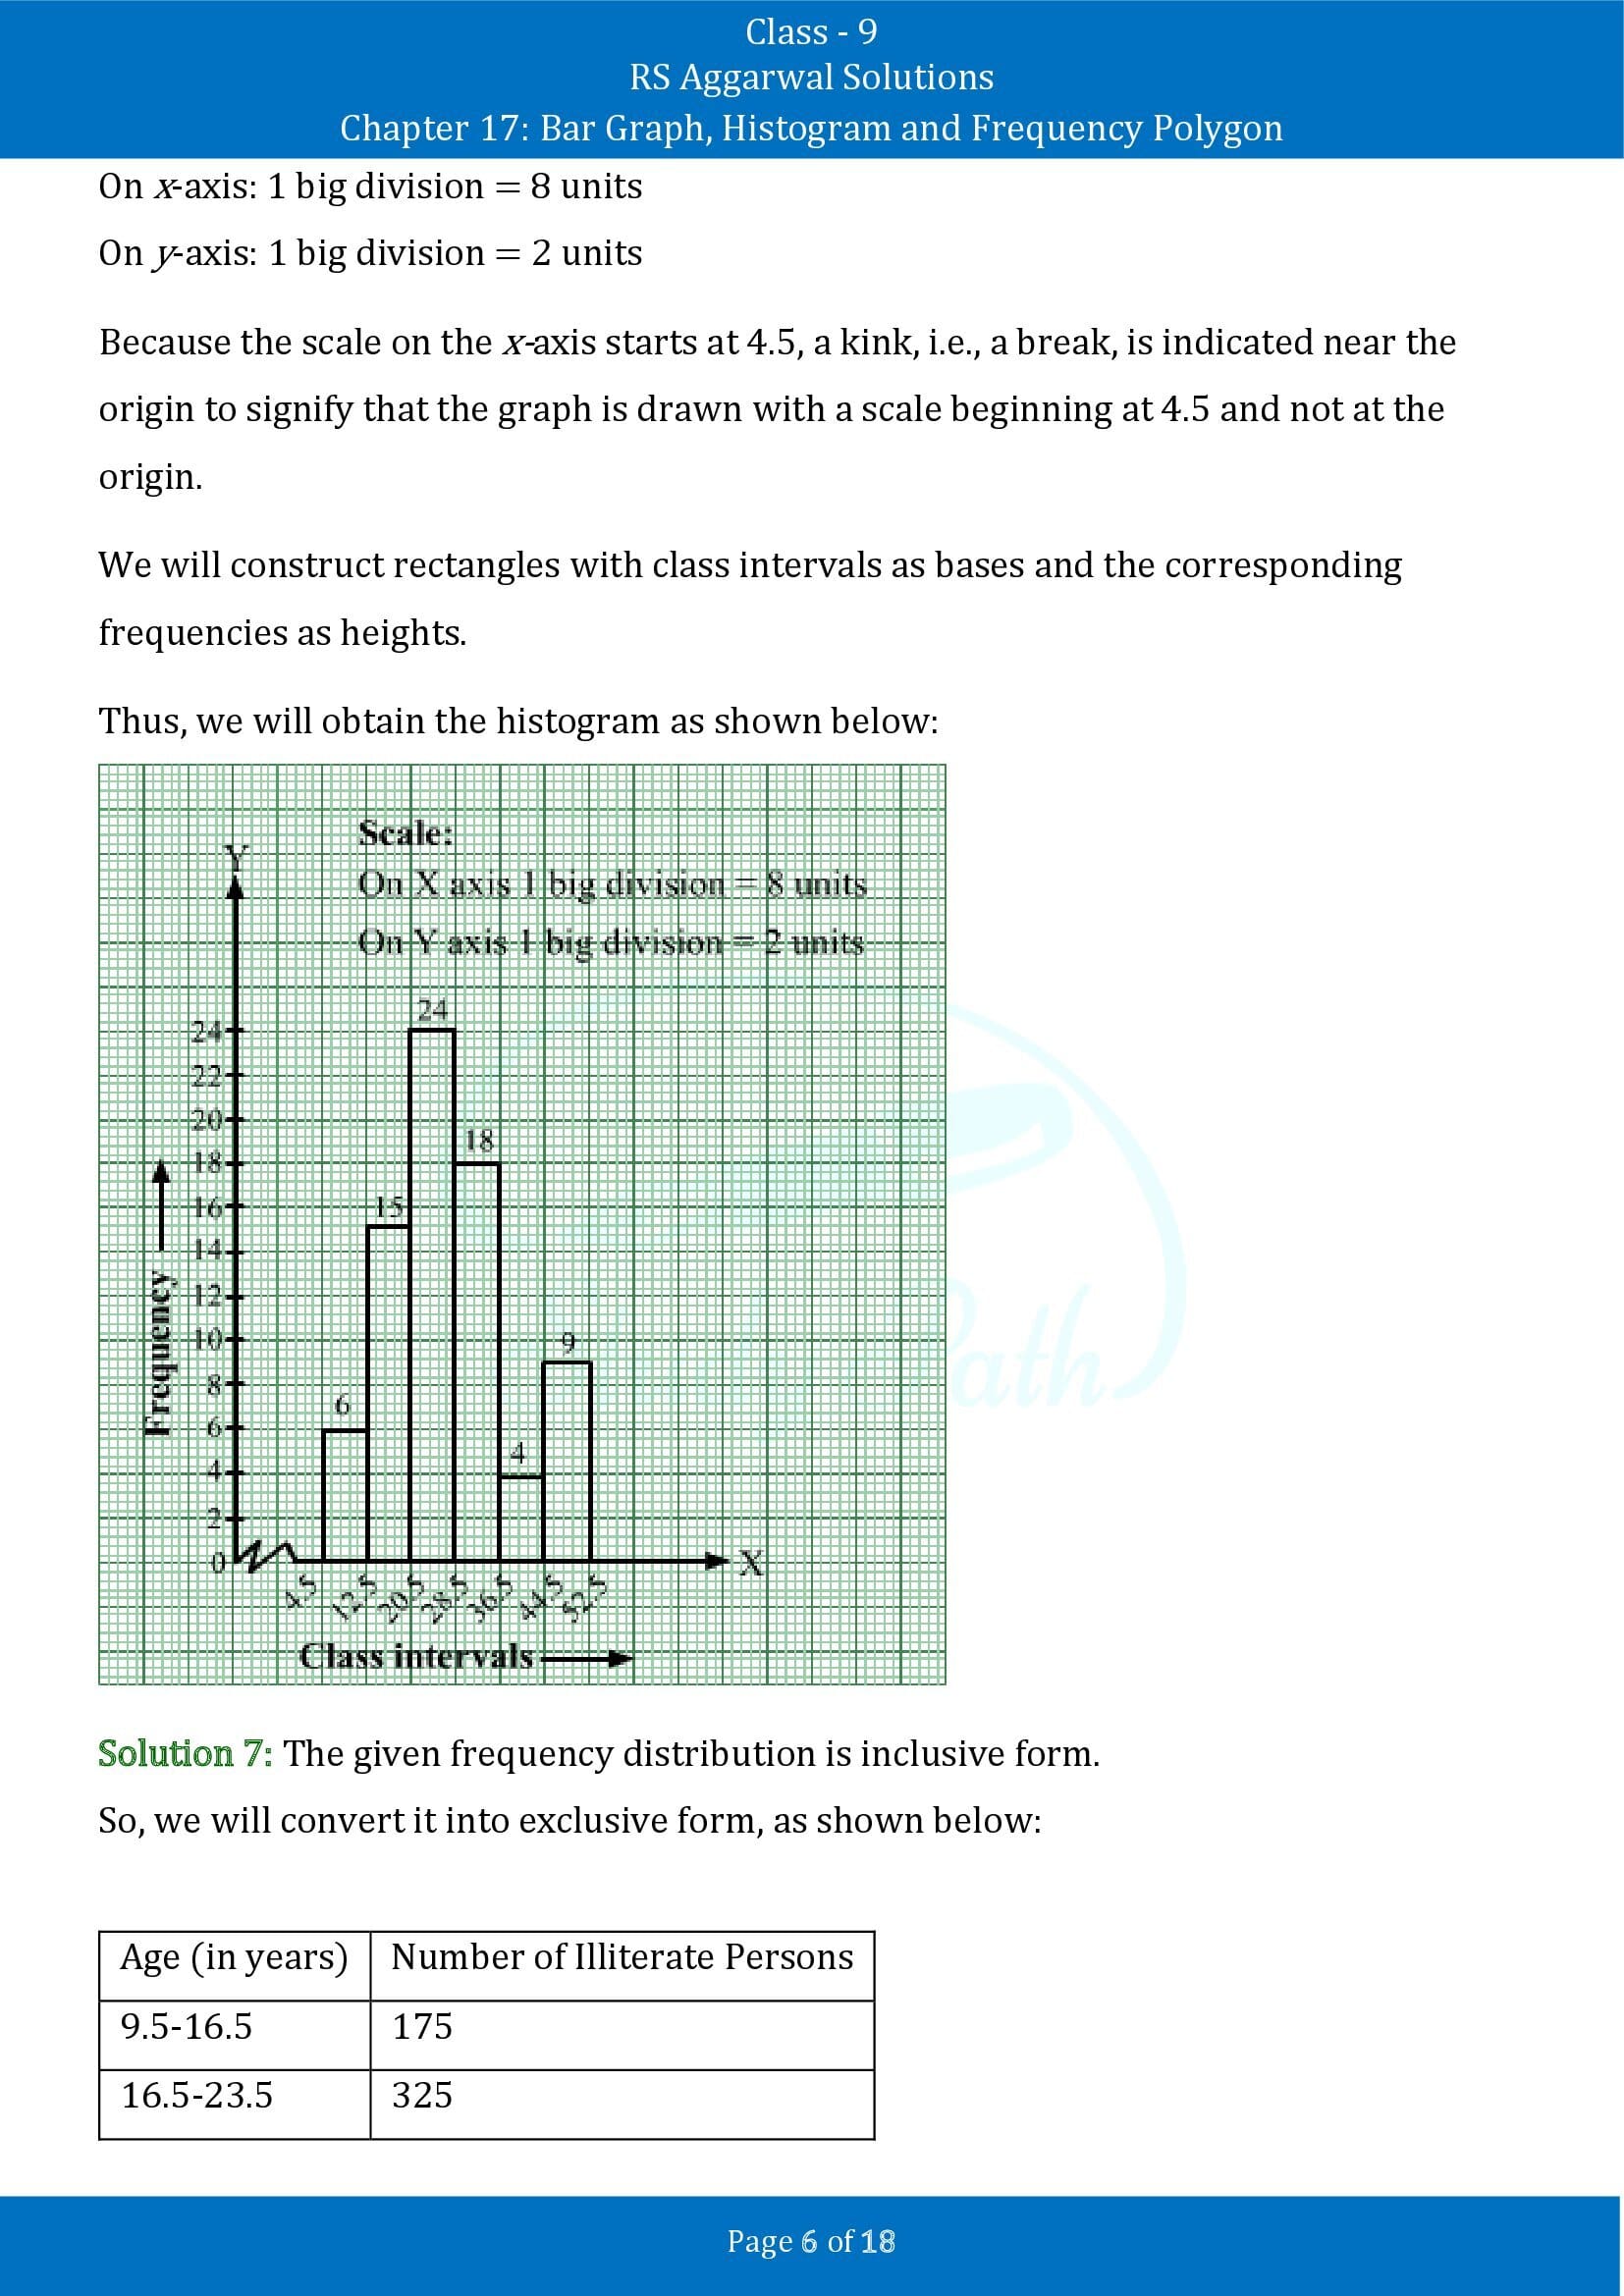 RS Aggarwal Solutions Class 9 Chapter 17 Bar Graph Histogram and Frequency Polygon Exercise 17B 00006